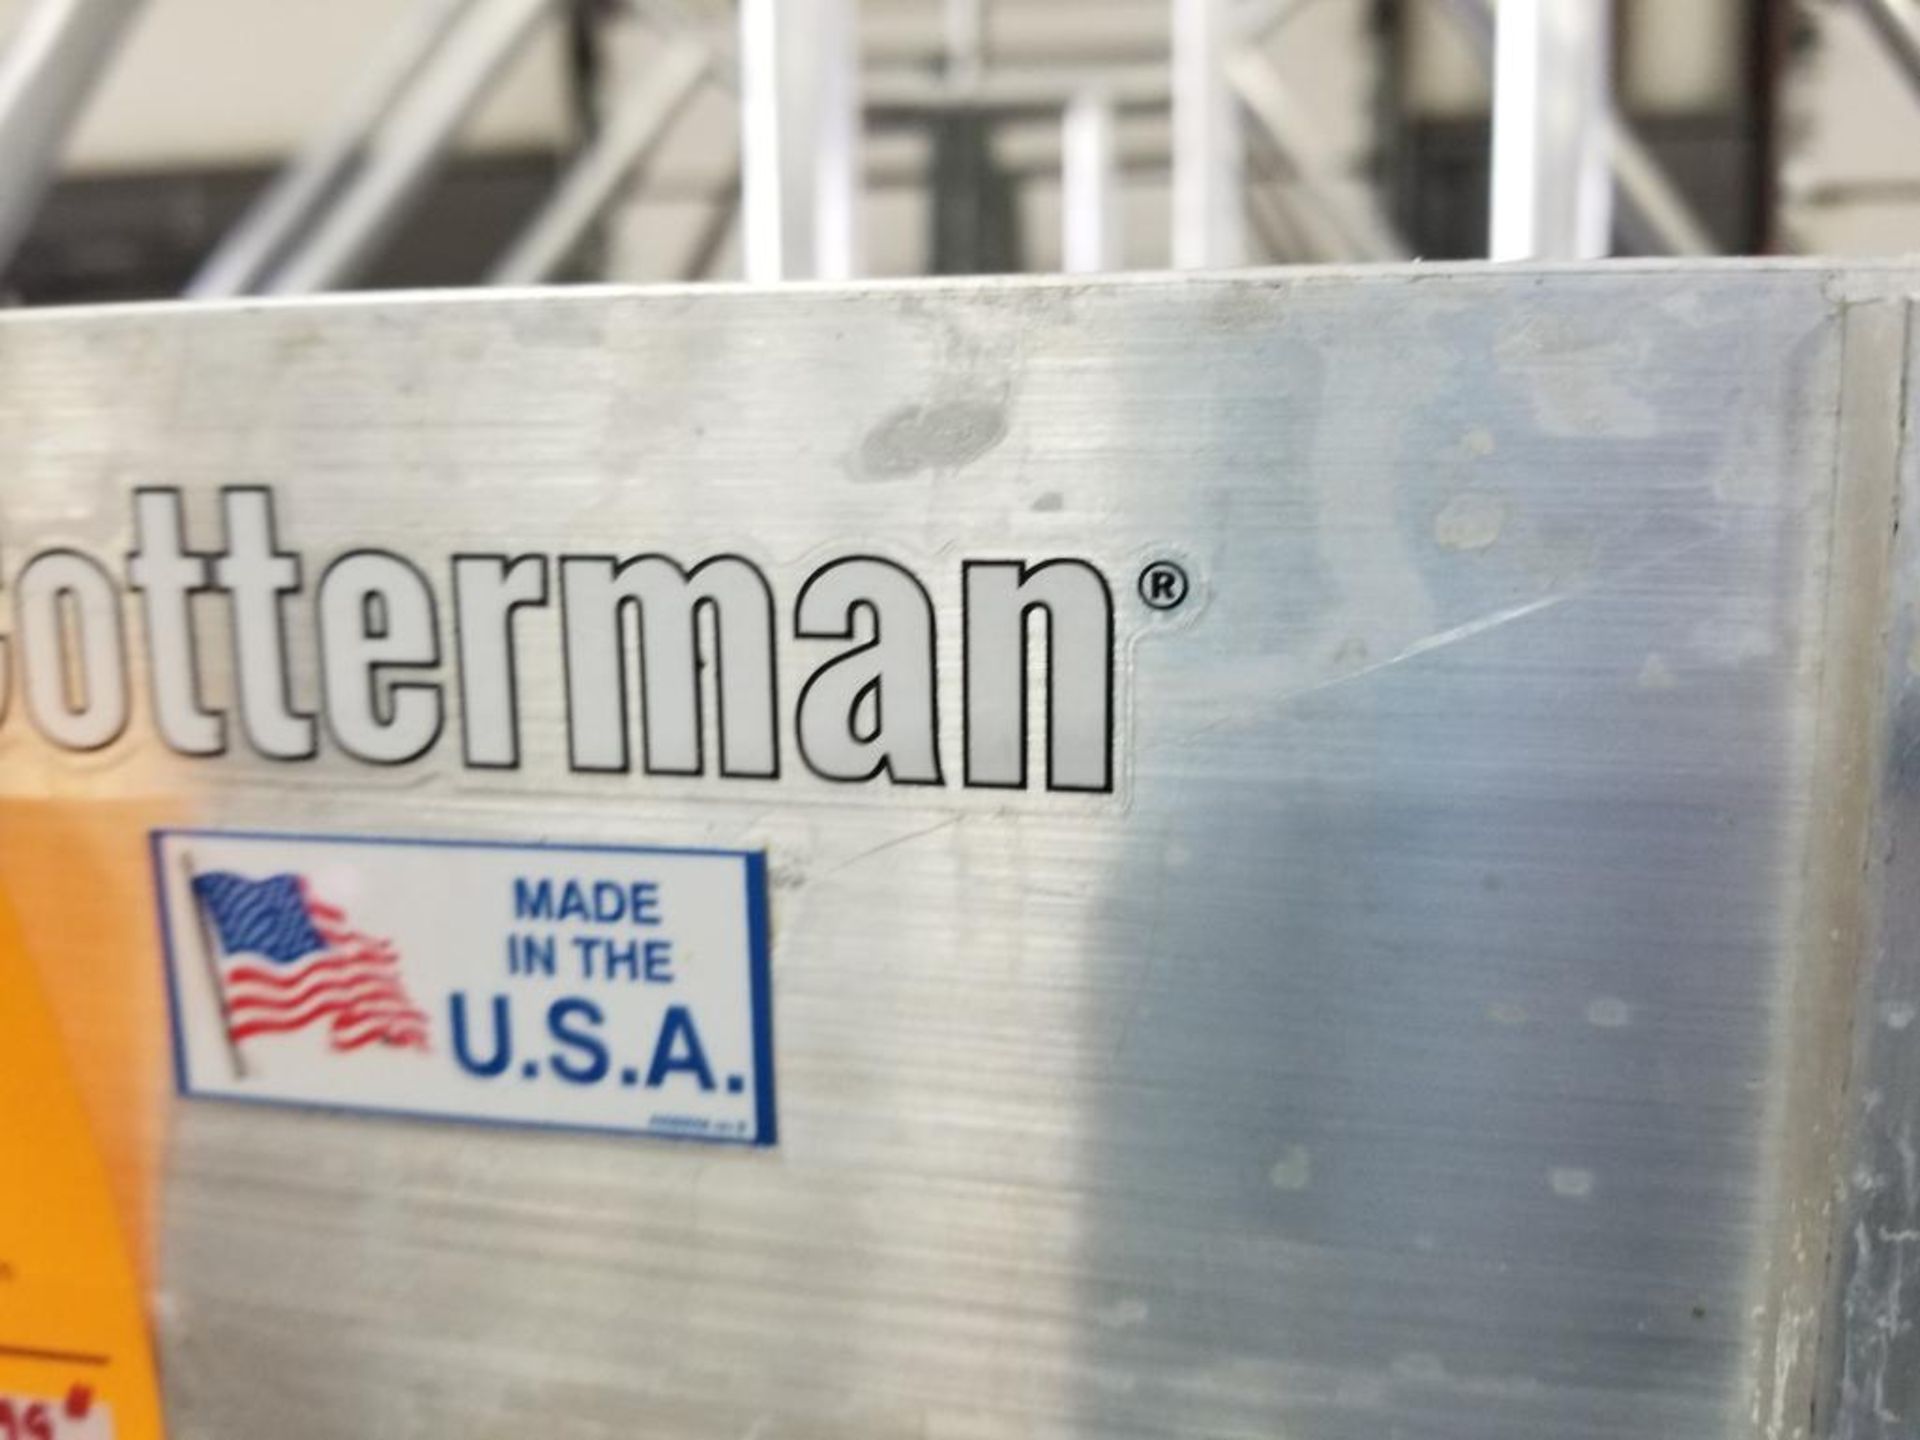 Cotterman aluminum crossover bridge step set. 120" long x 30" wide x 99" tall with rail. - Image 3 of 9